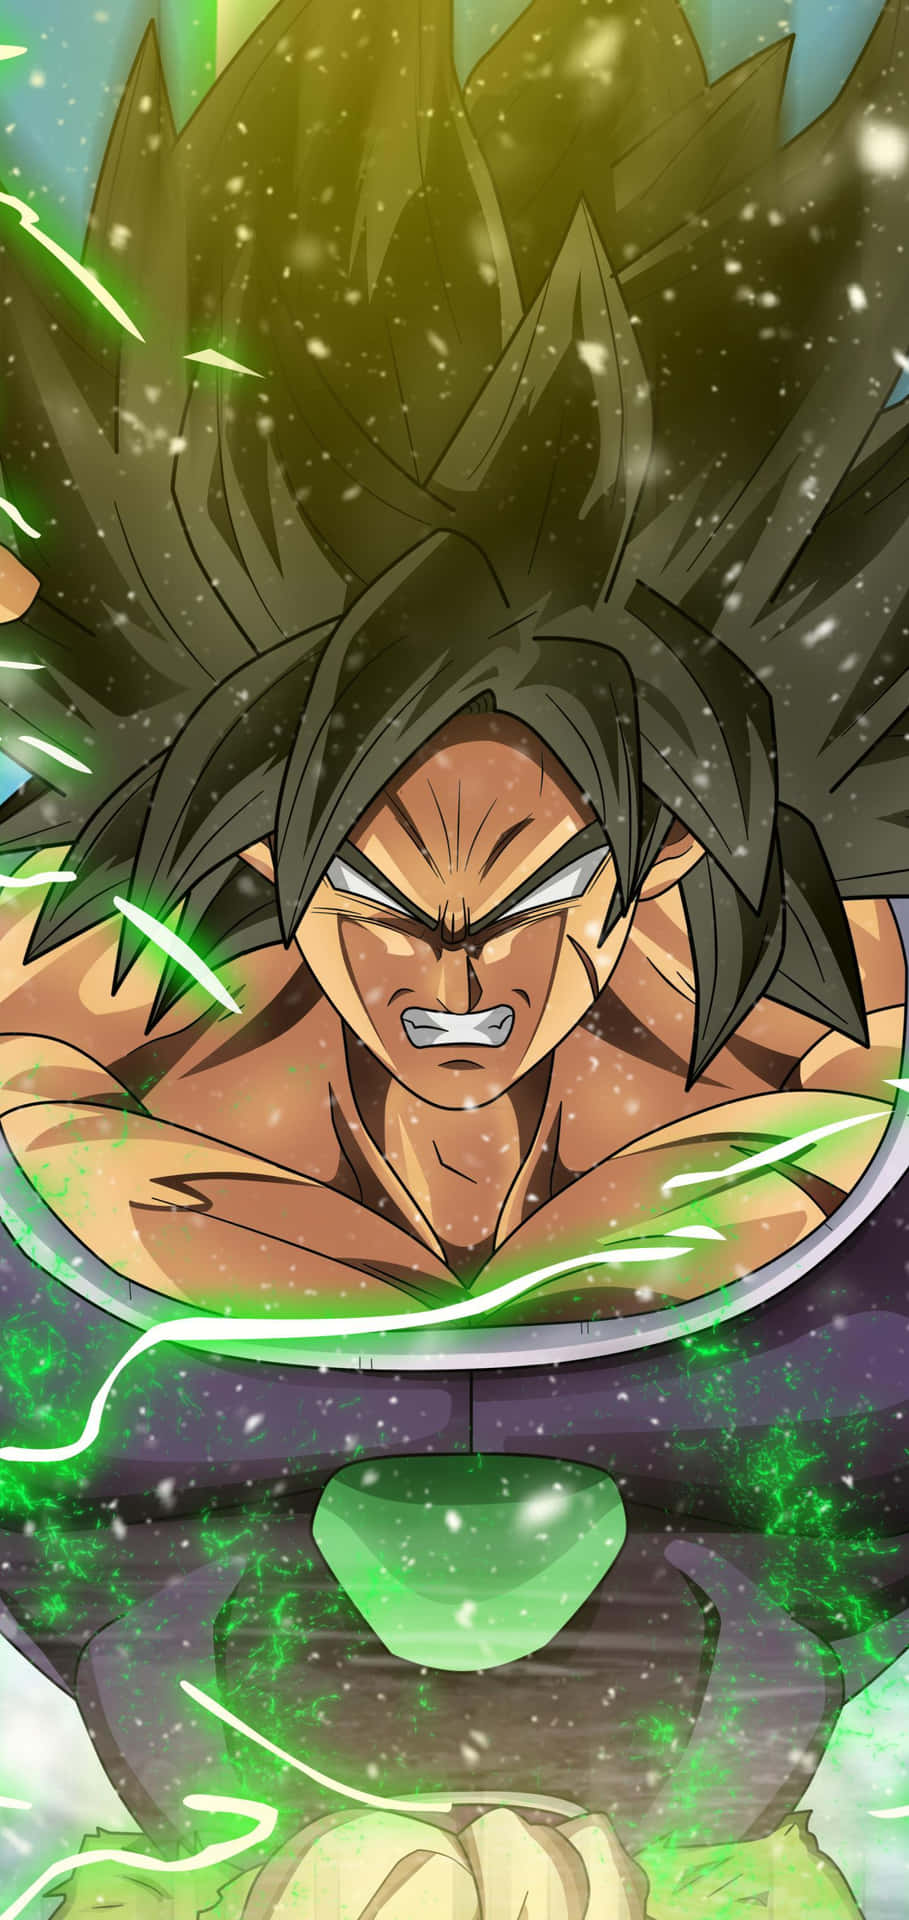 Take your love for classic characters to the next level with this eye-catching Broly inspired iPhone wallpaper. Wallpaper